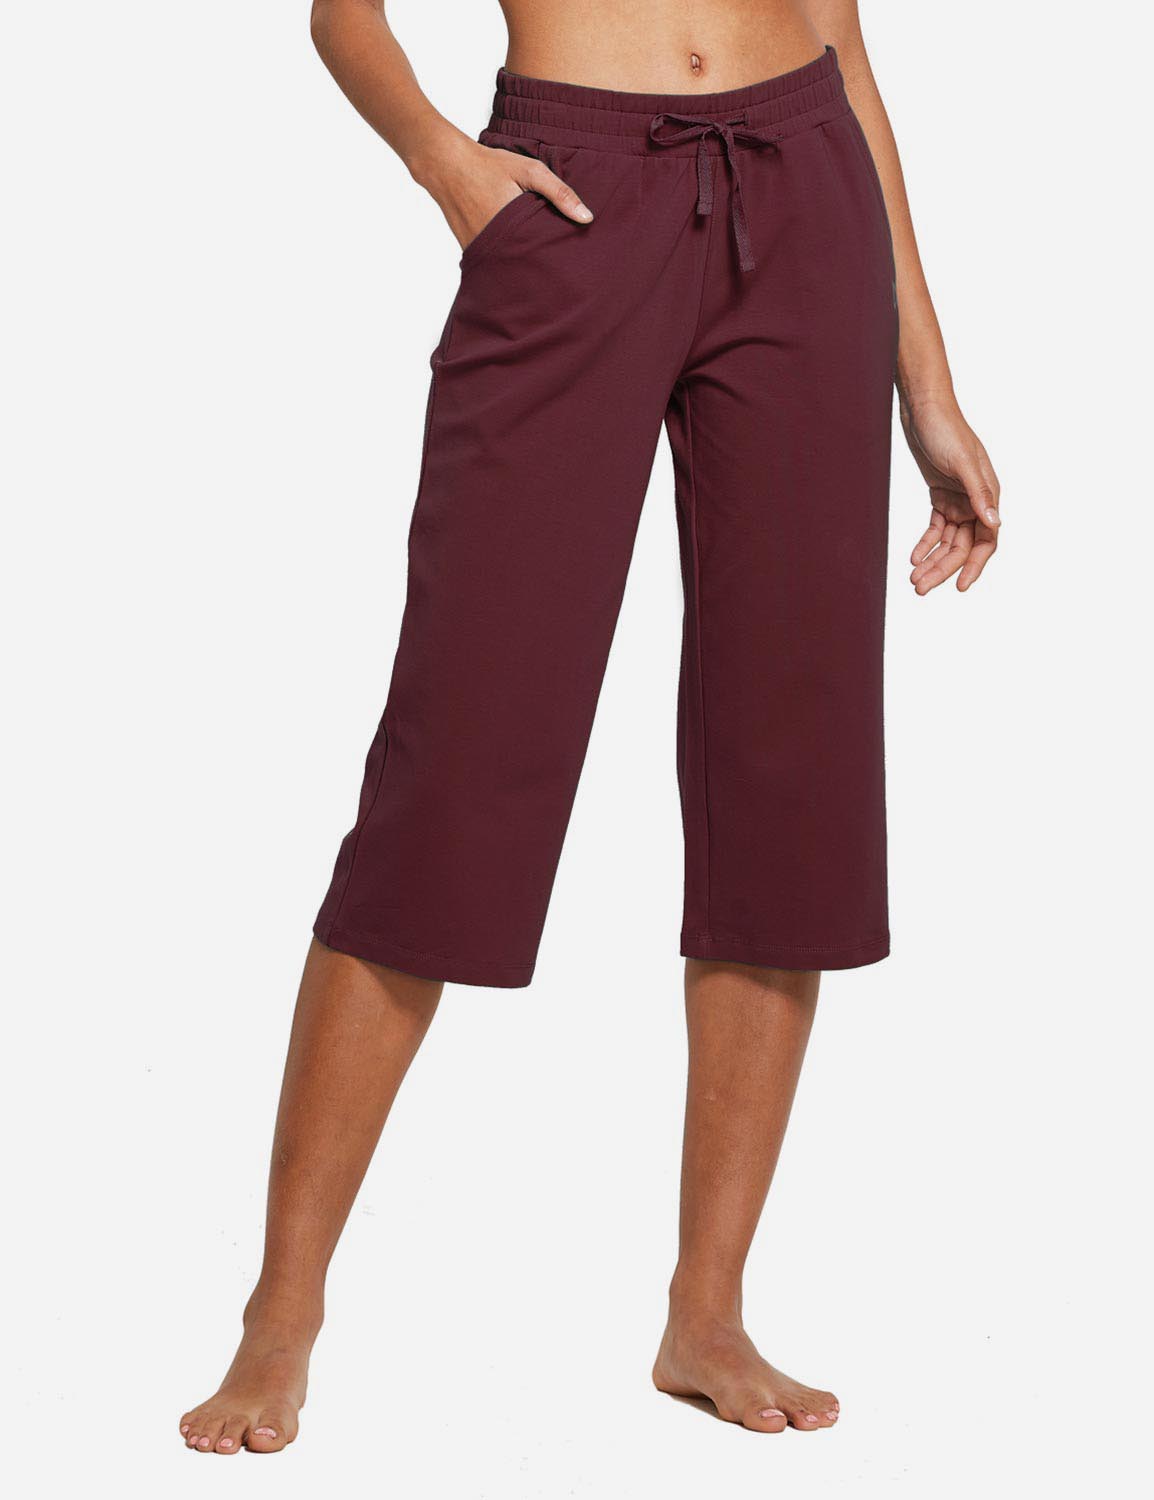 Baleaf Women's 20'' High Rise Drawcord Loose Fit Pocketed Sweatpants abh107 Burgundy Front